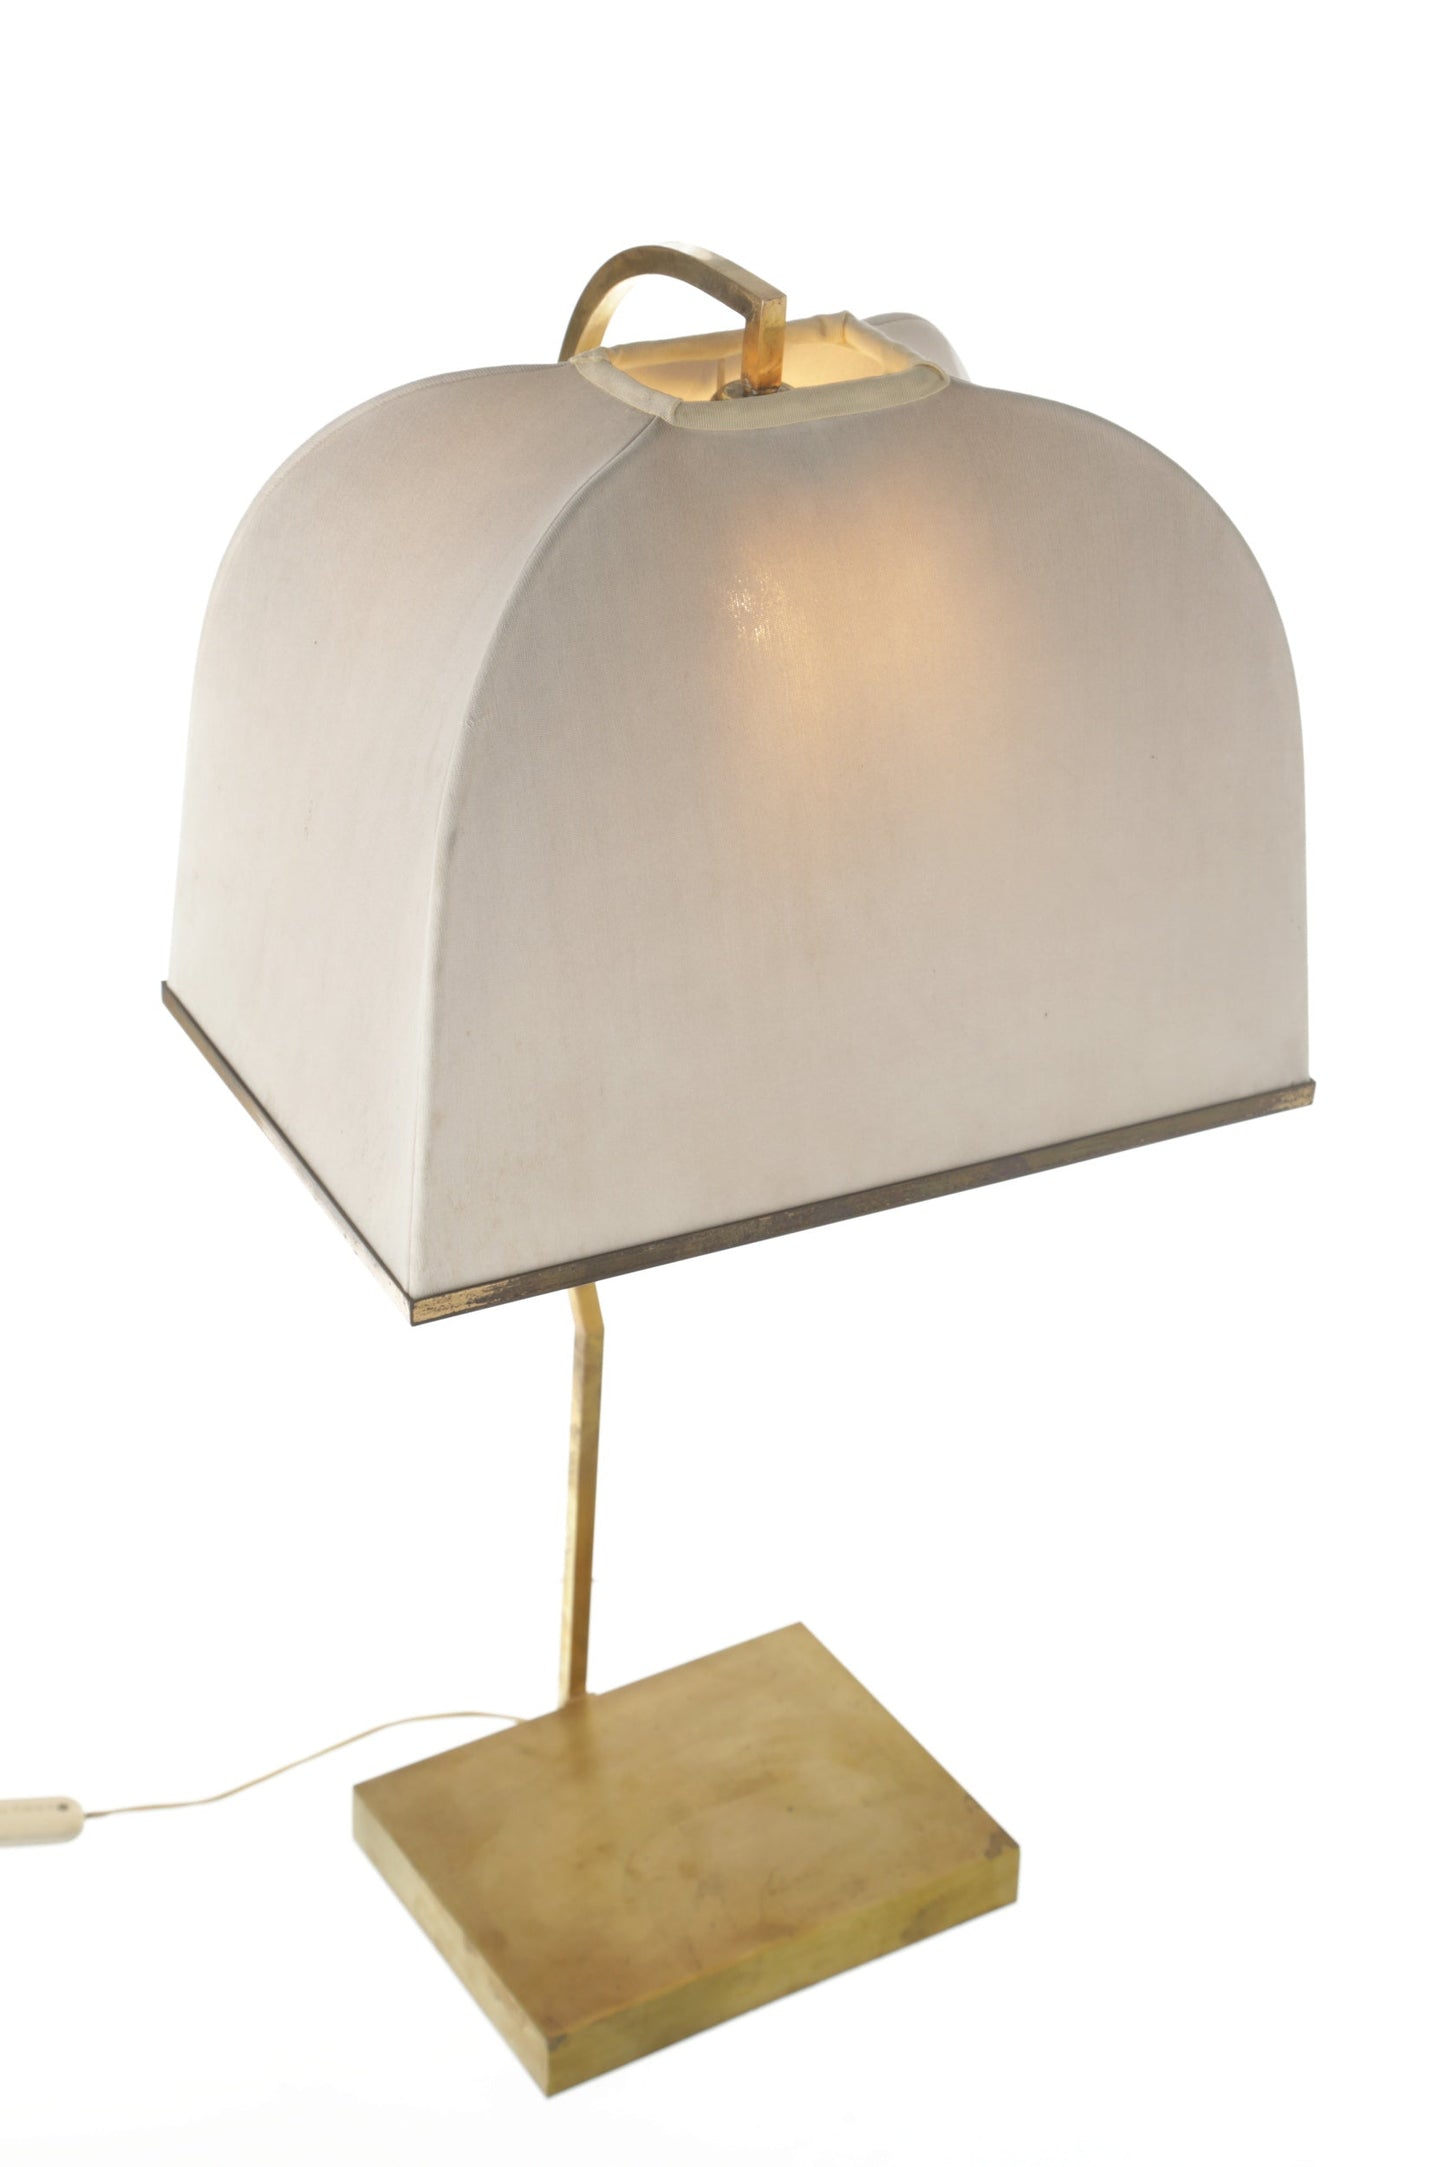 70s brass table lamp